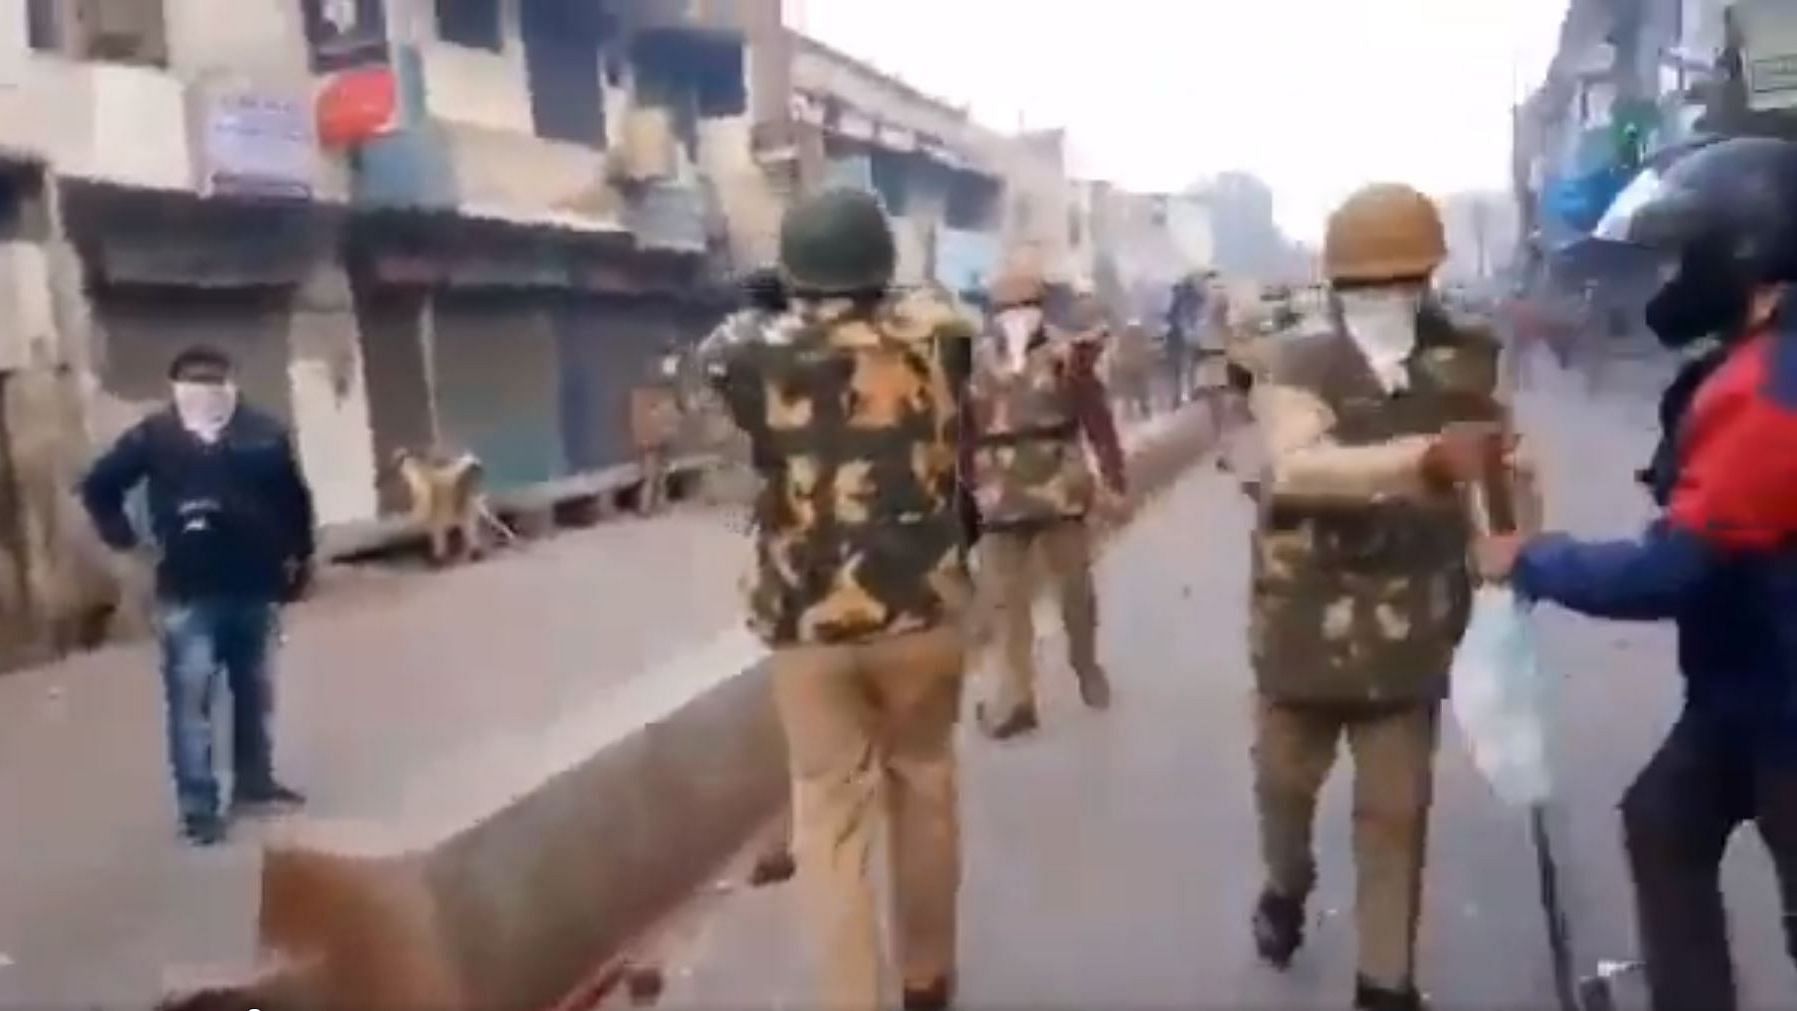 A screengrab of the video, purportedly from UP’s Kanpur, taken during the anti-CAA protests.